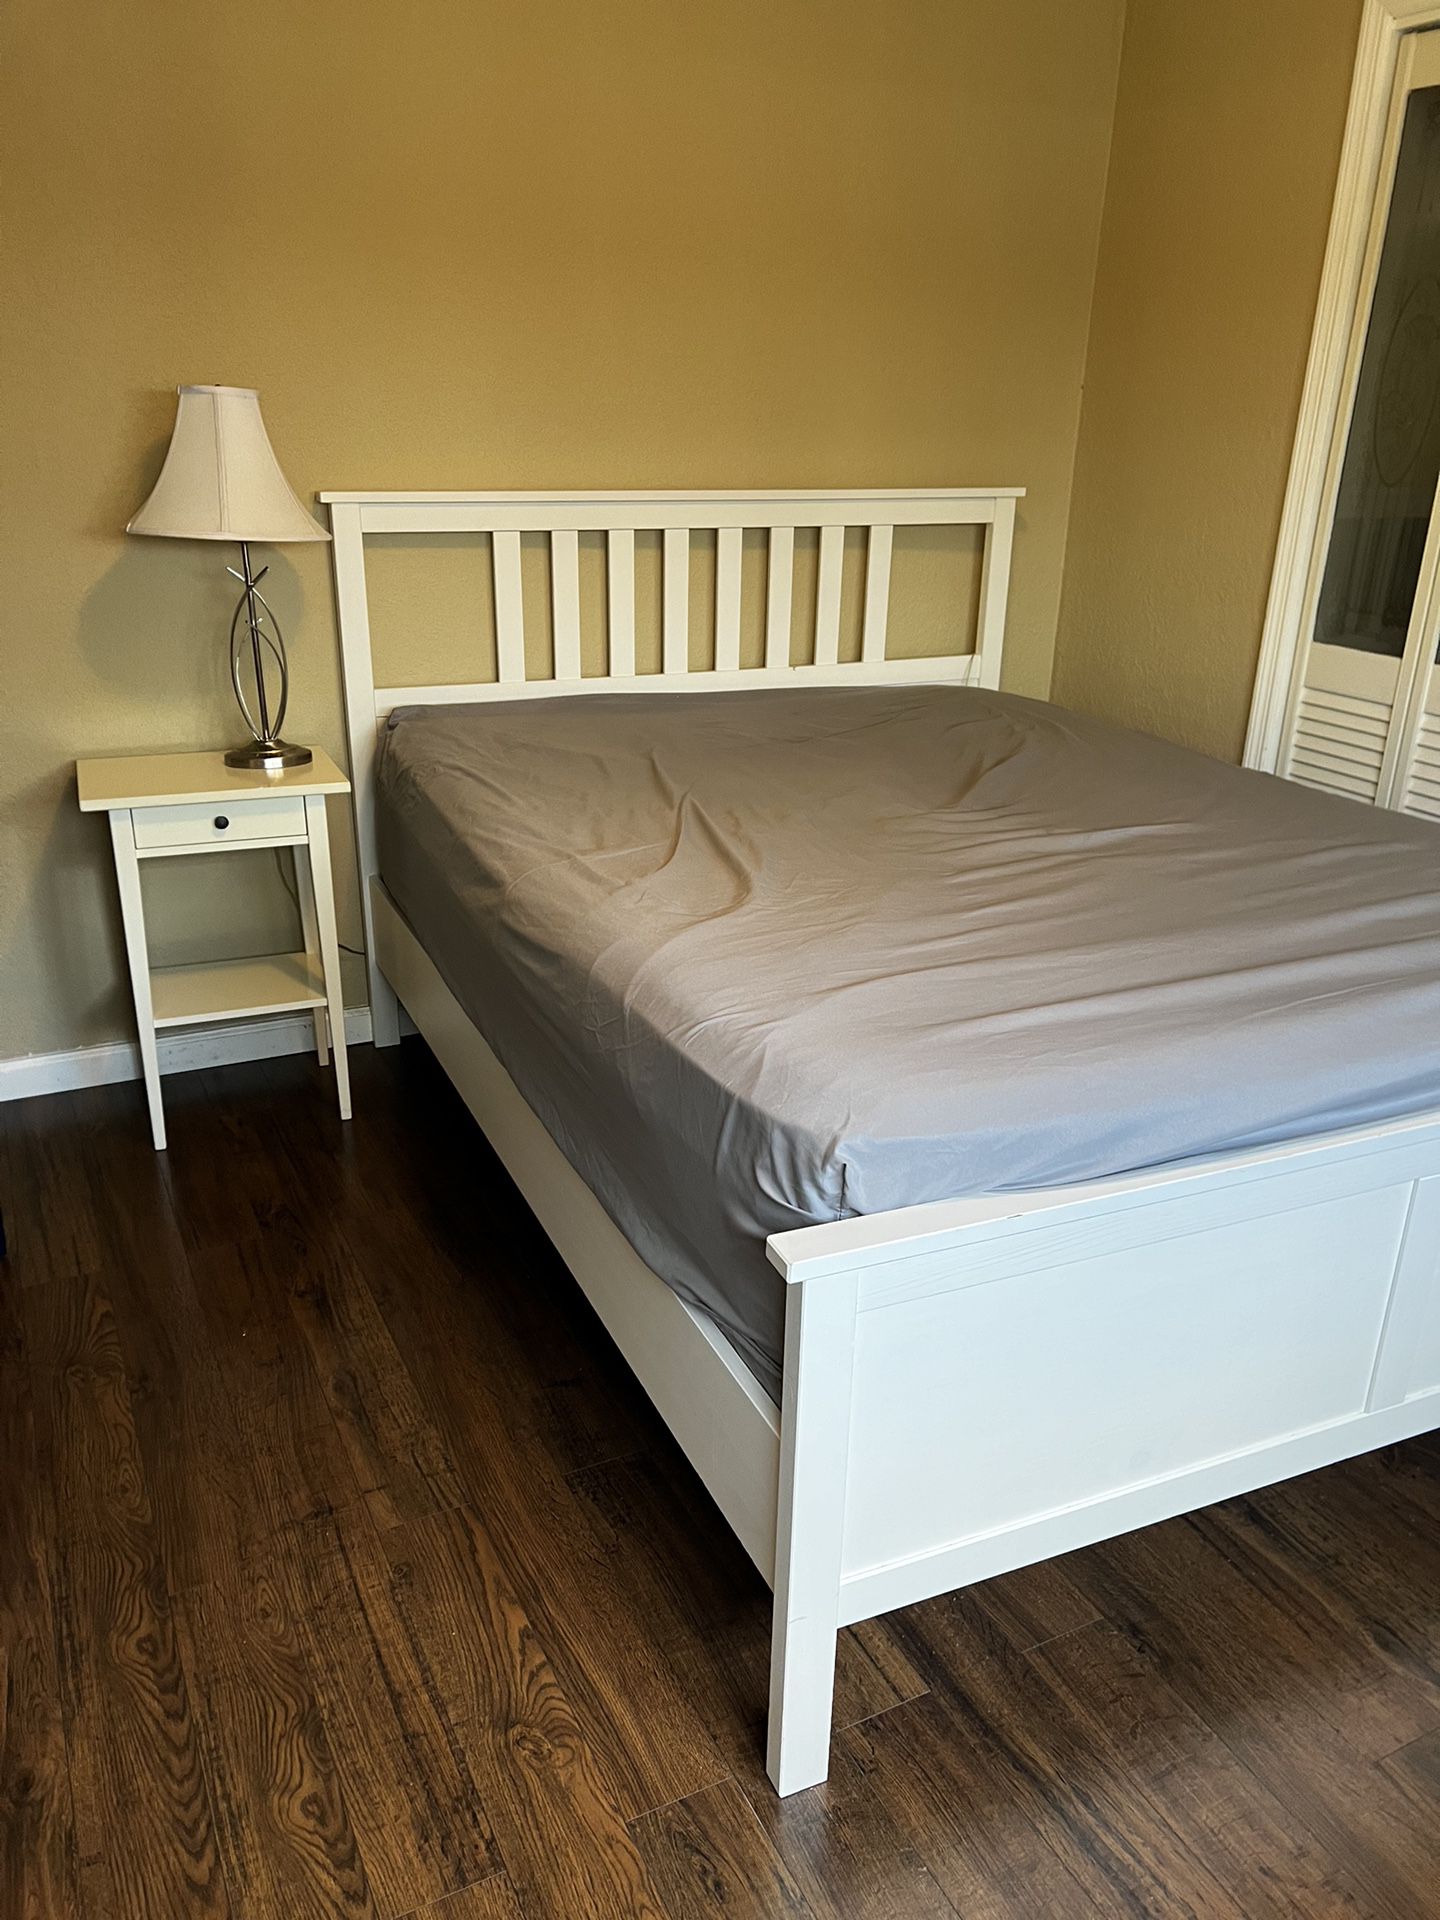 IKEA White Queen Size Bed Frame And Nightstands And Lamp 